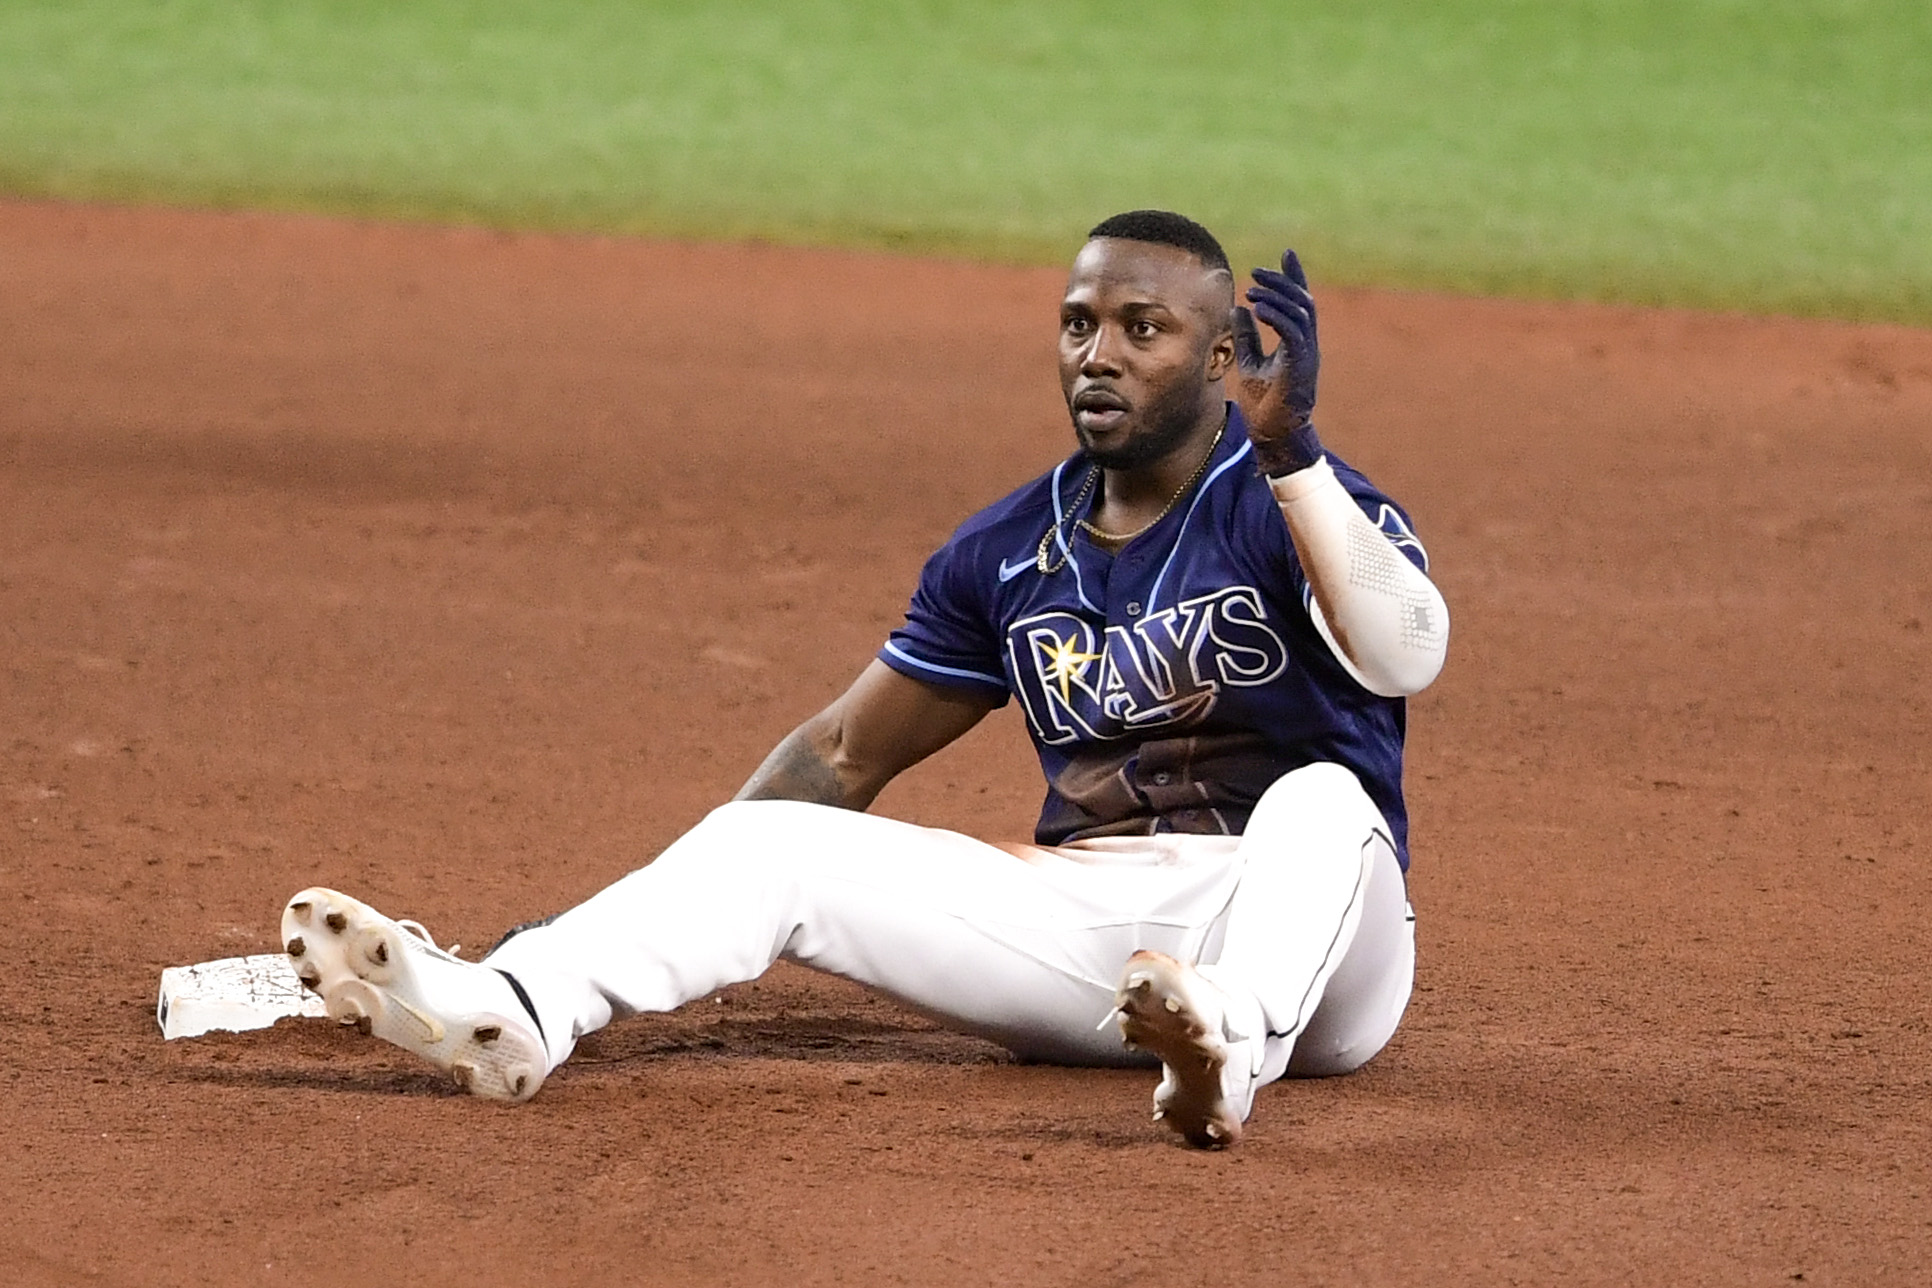 What happened to the Rays' super-slugging outfielder, Randy